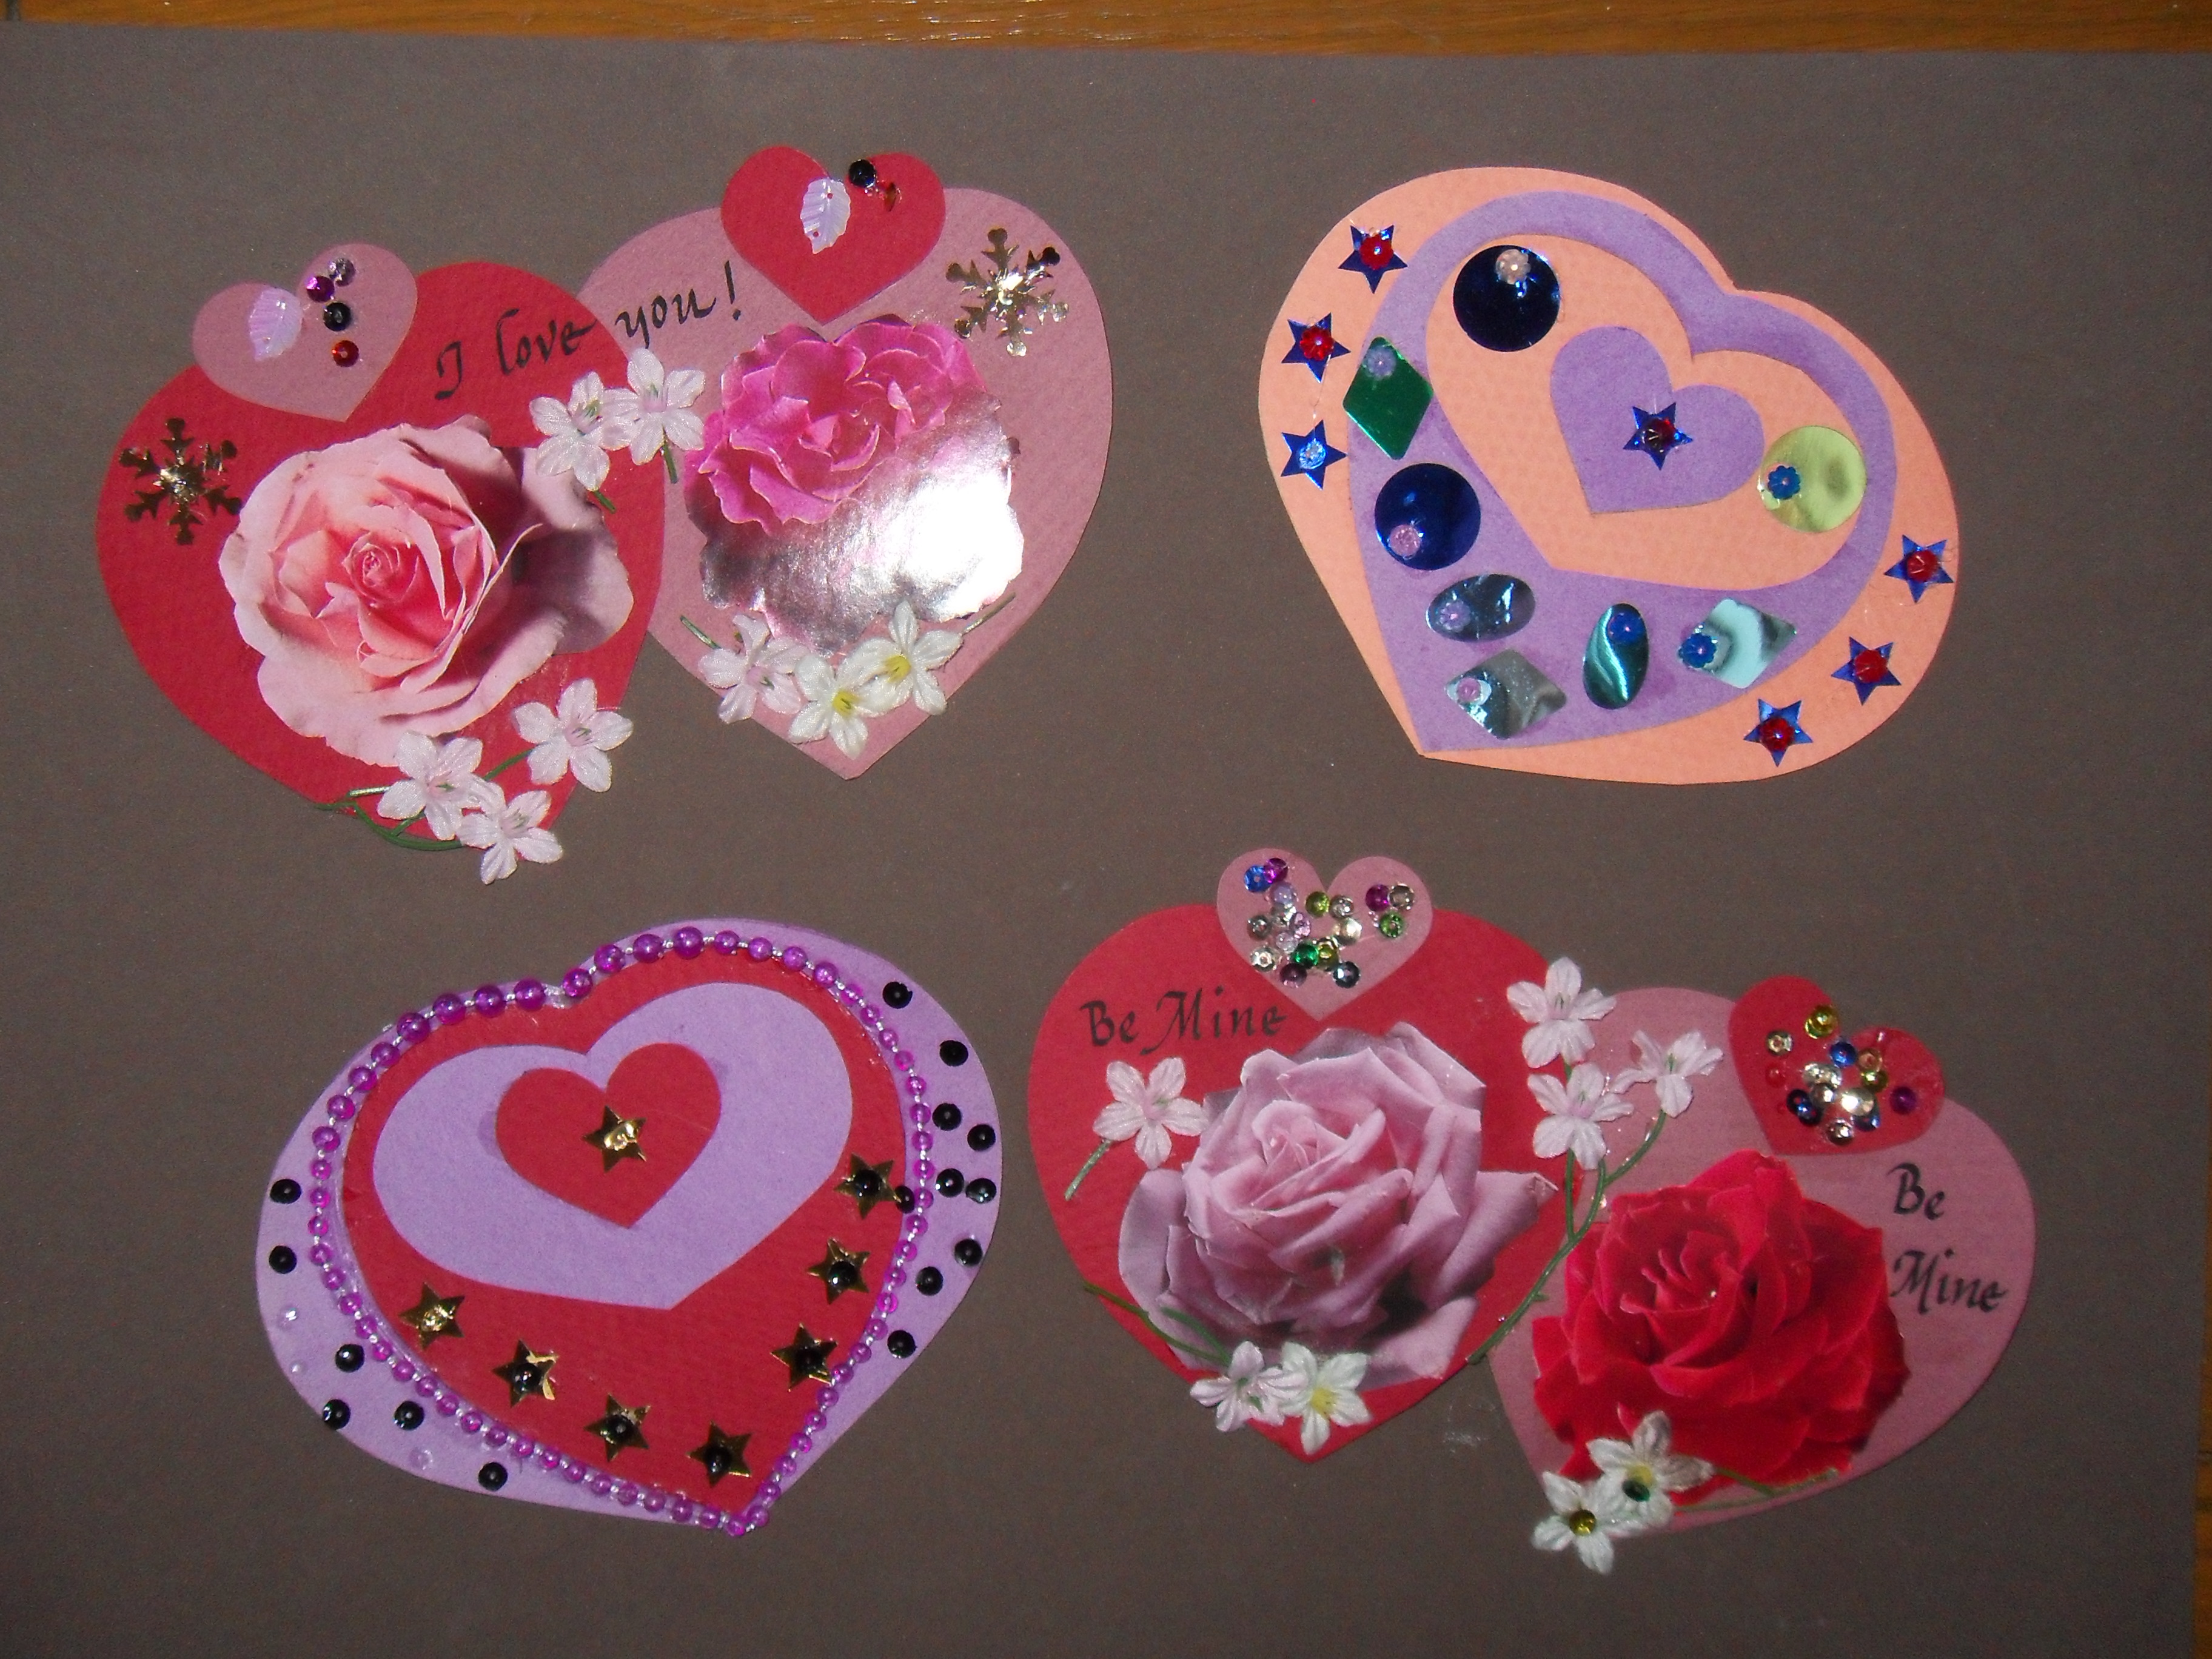 Recycled Valentine's Day collage